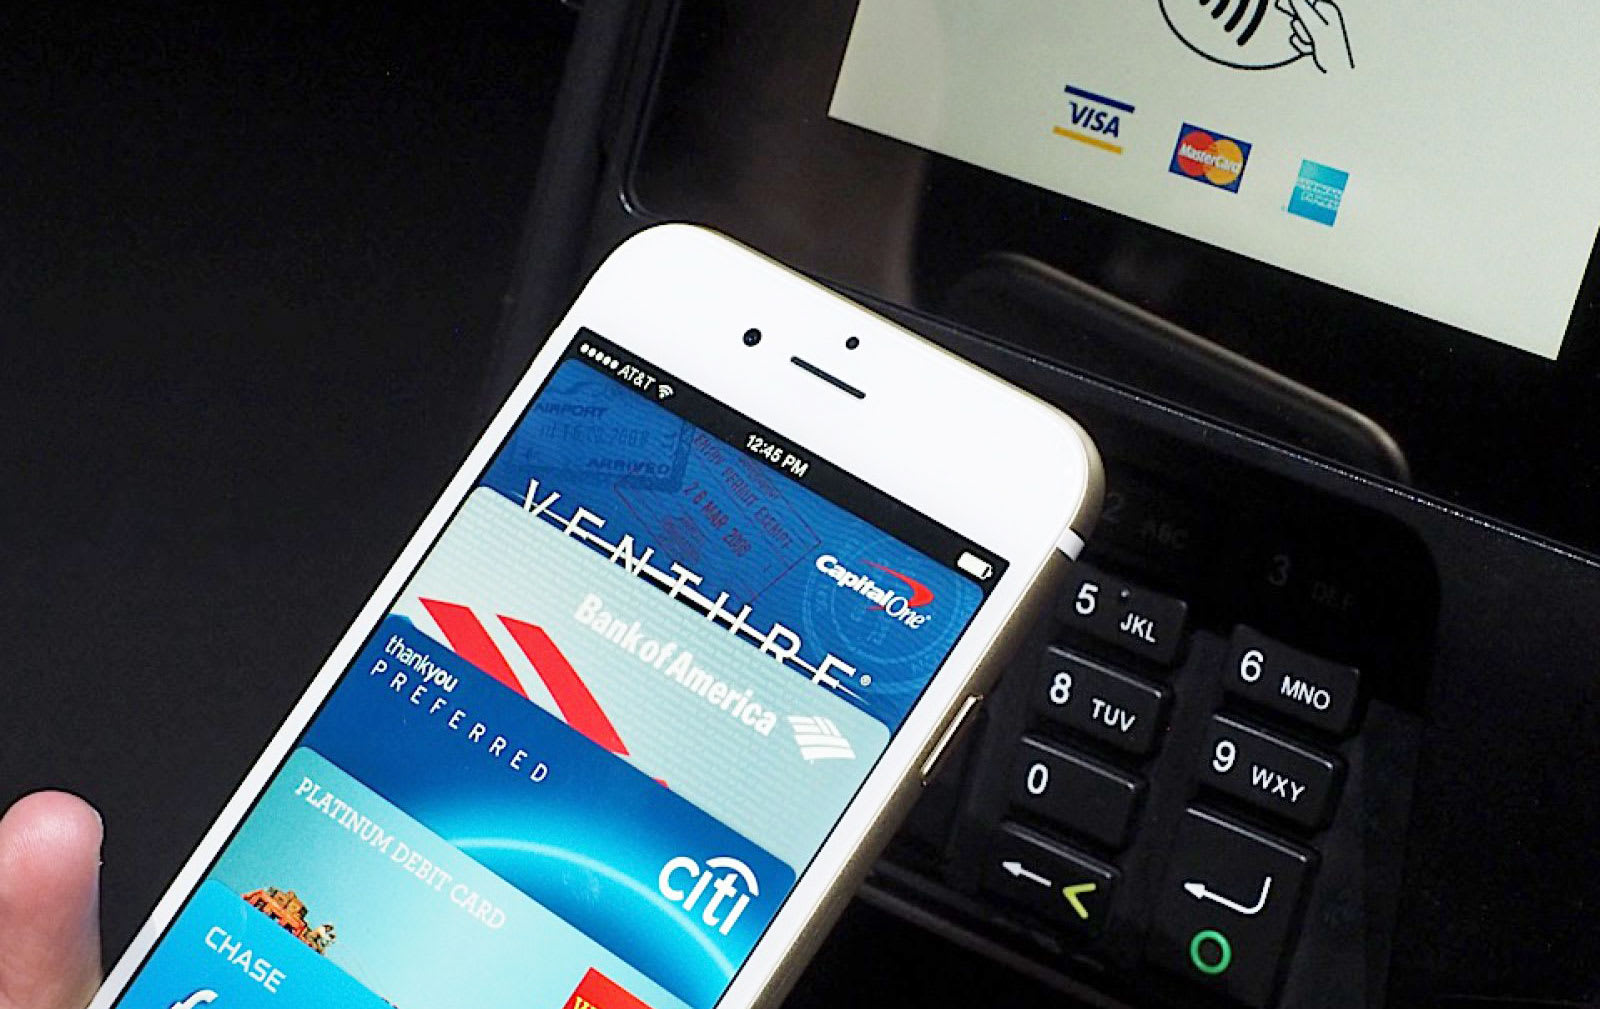 Apple Pay users can withdraw money from select BoA ATMs ...